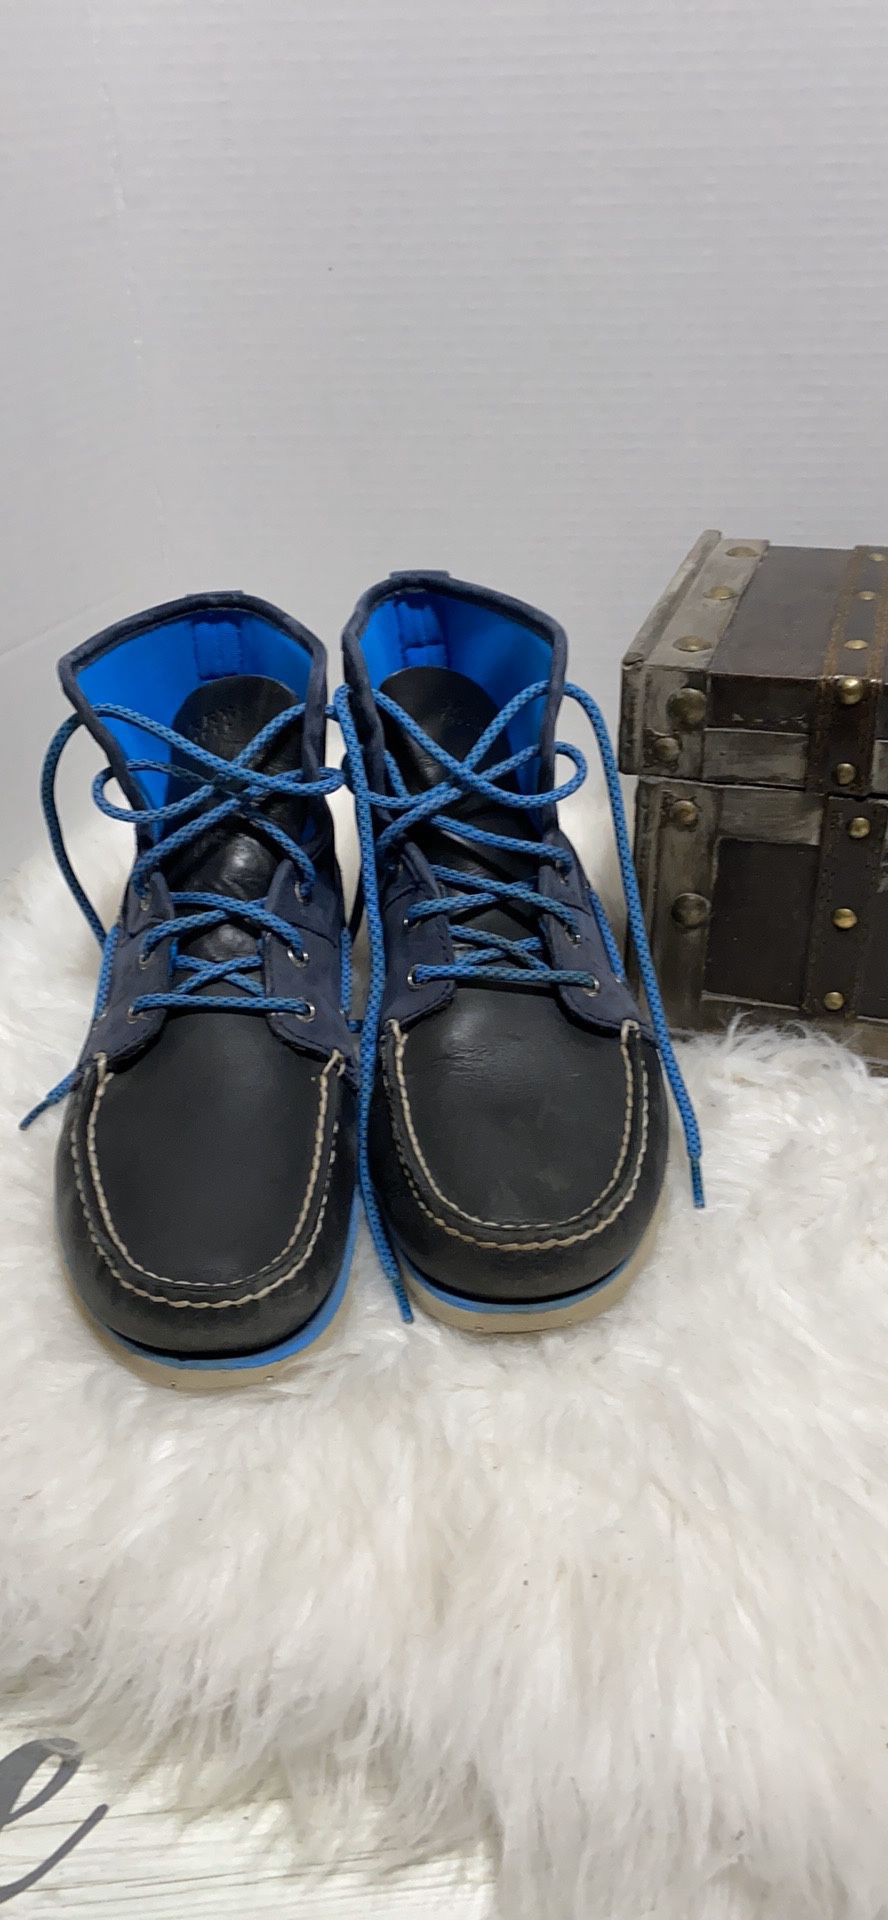 Sperry Top-Sider Boat Lite Men's Boots